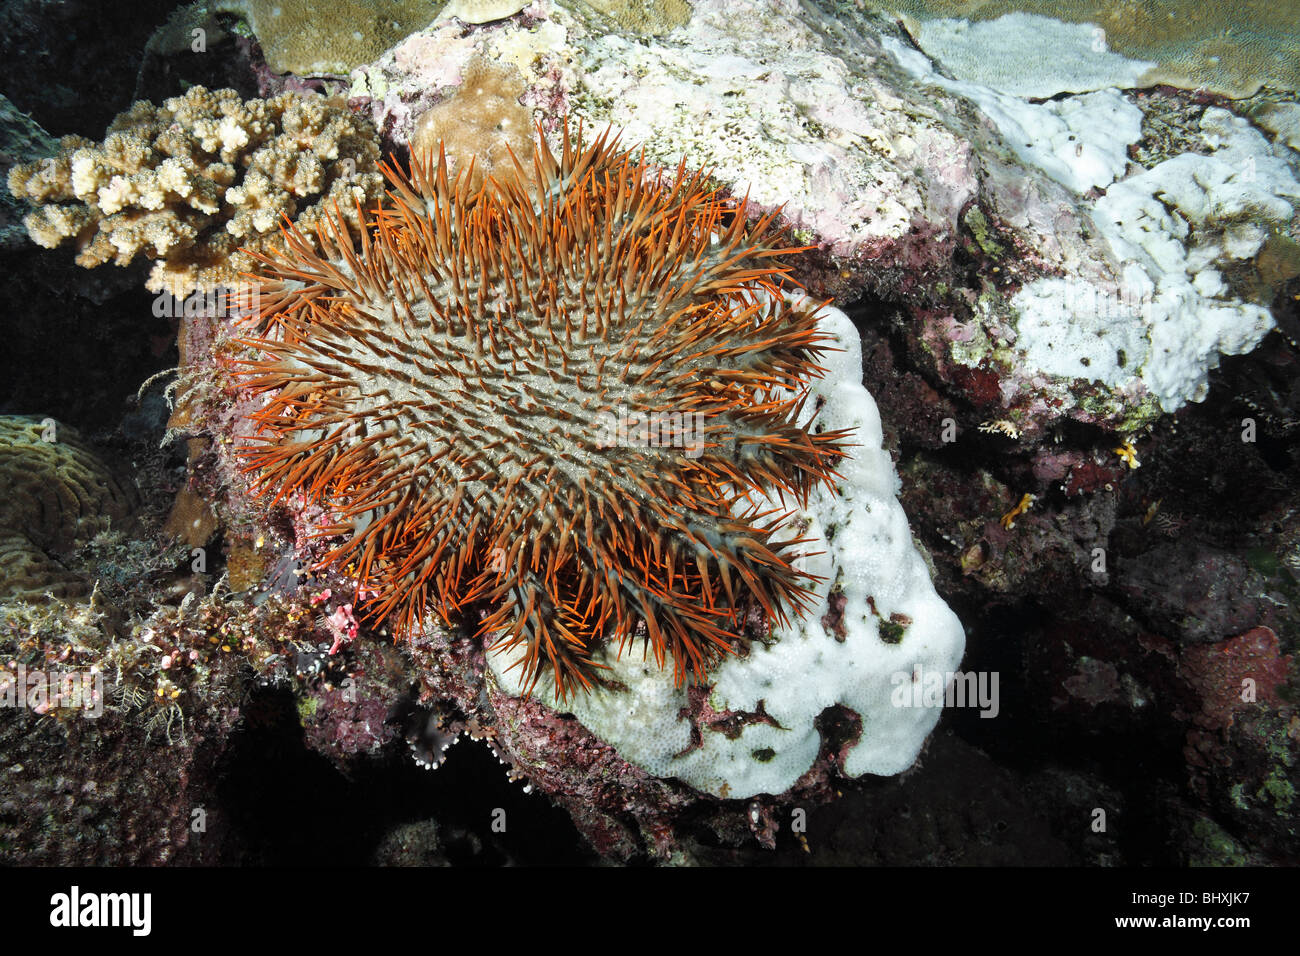 Crown of Thorns starfish, Acanthaster planci, feeding on coral. White patches can be seen where the coral has been eaten Stock Photo